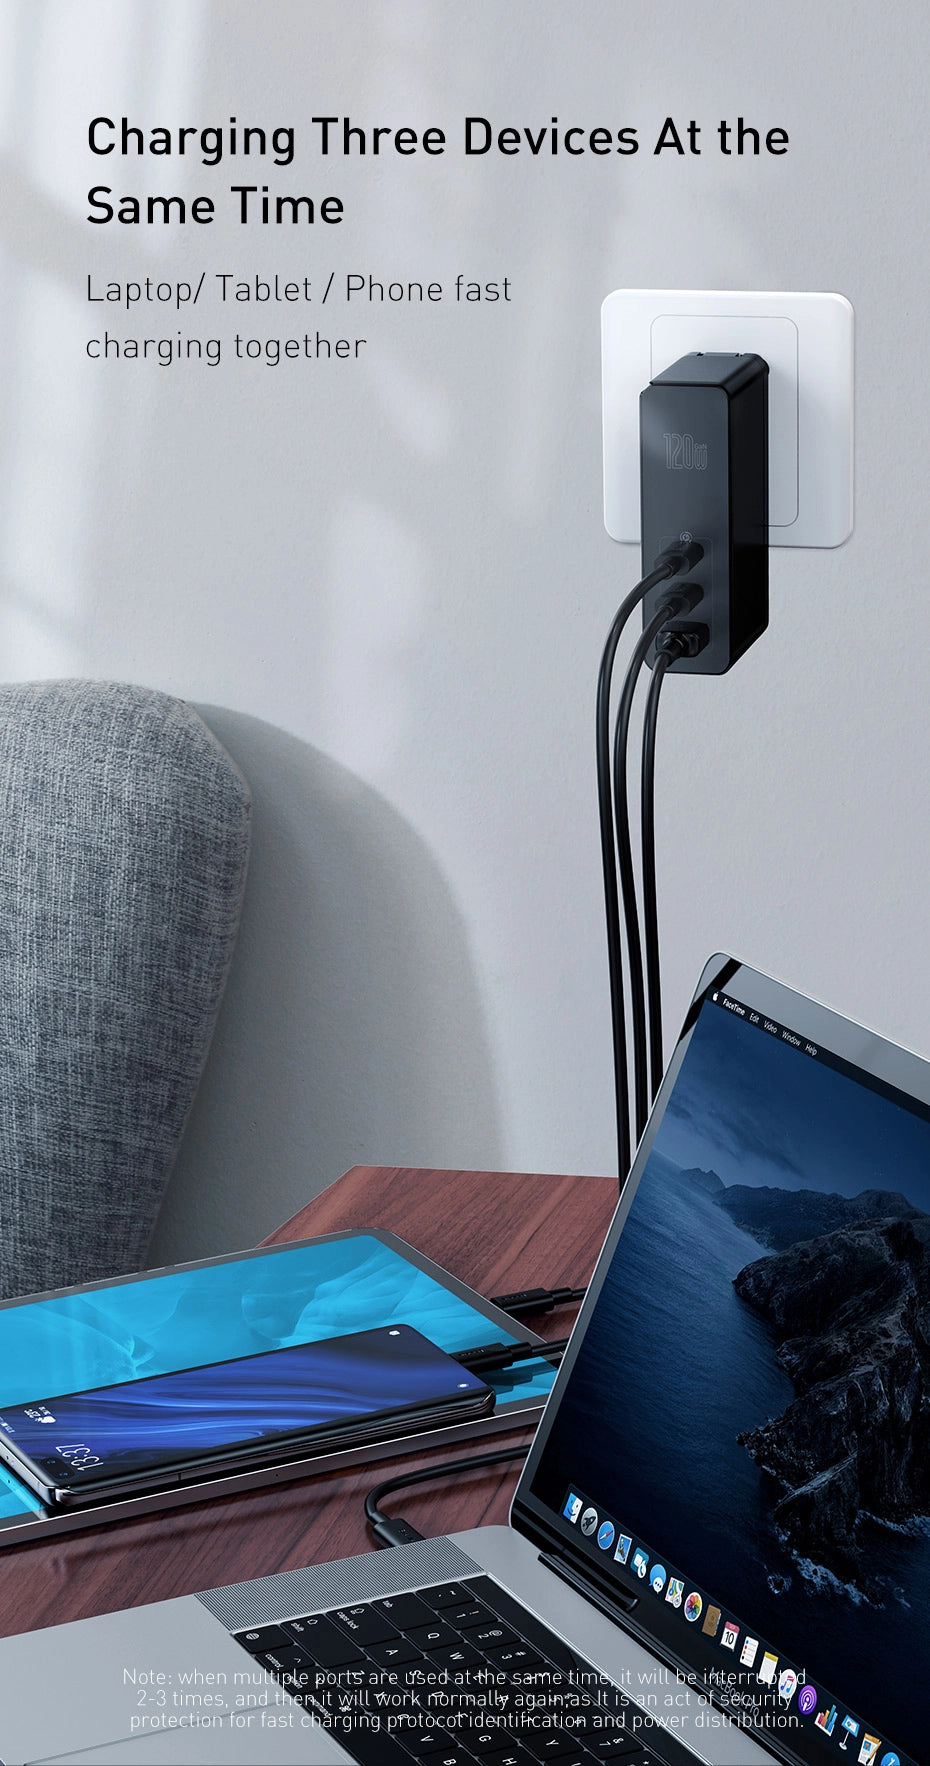 Charging Three Devices At the Same Time Laptop/ Tablet / Phone fast charging together